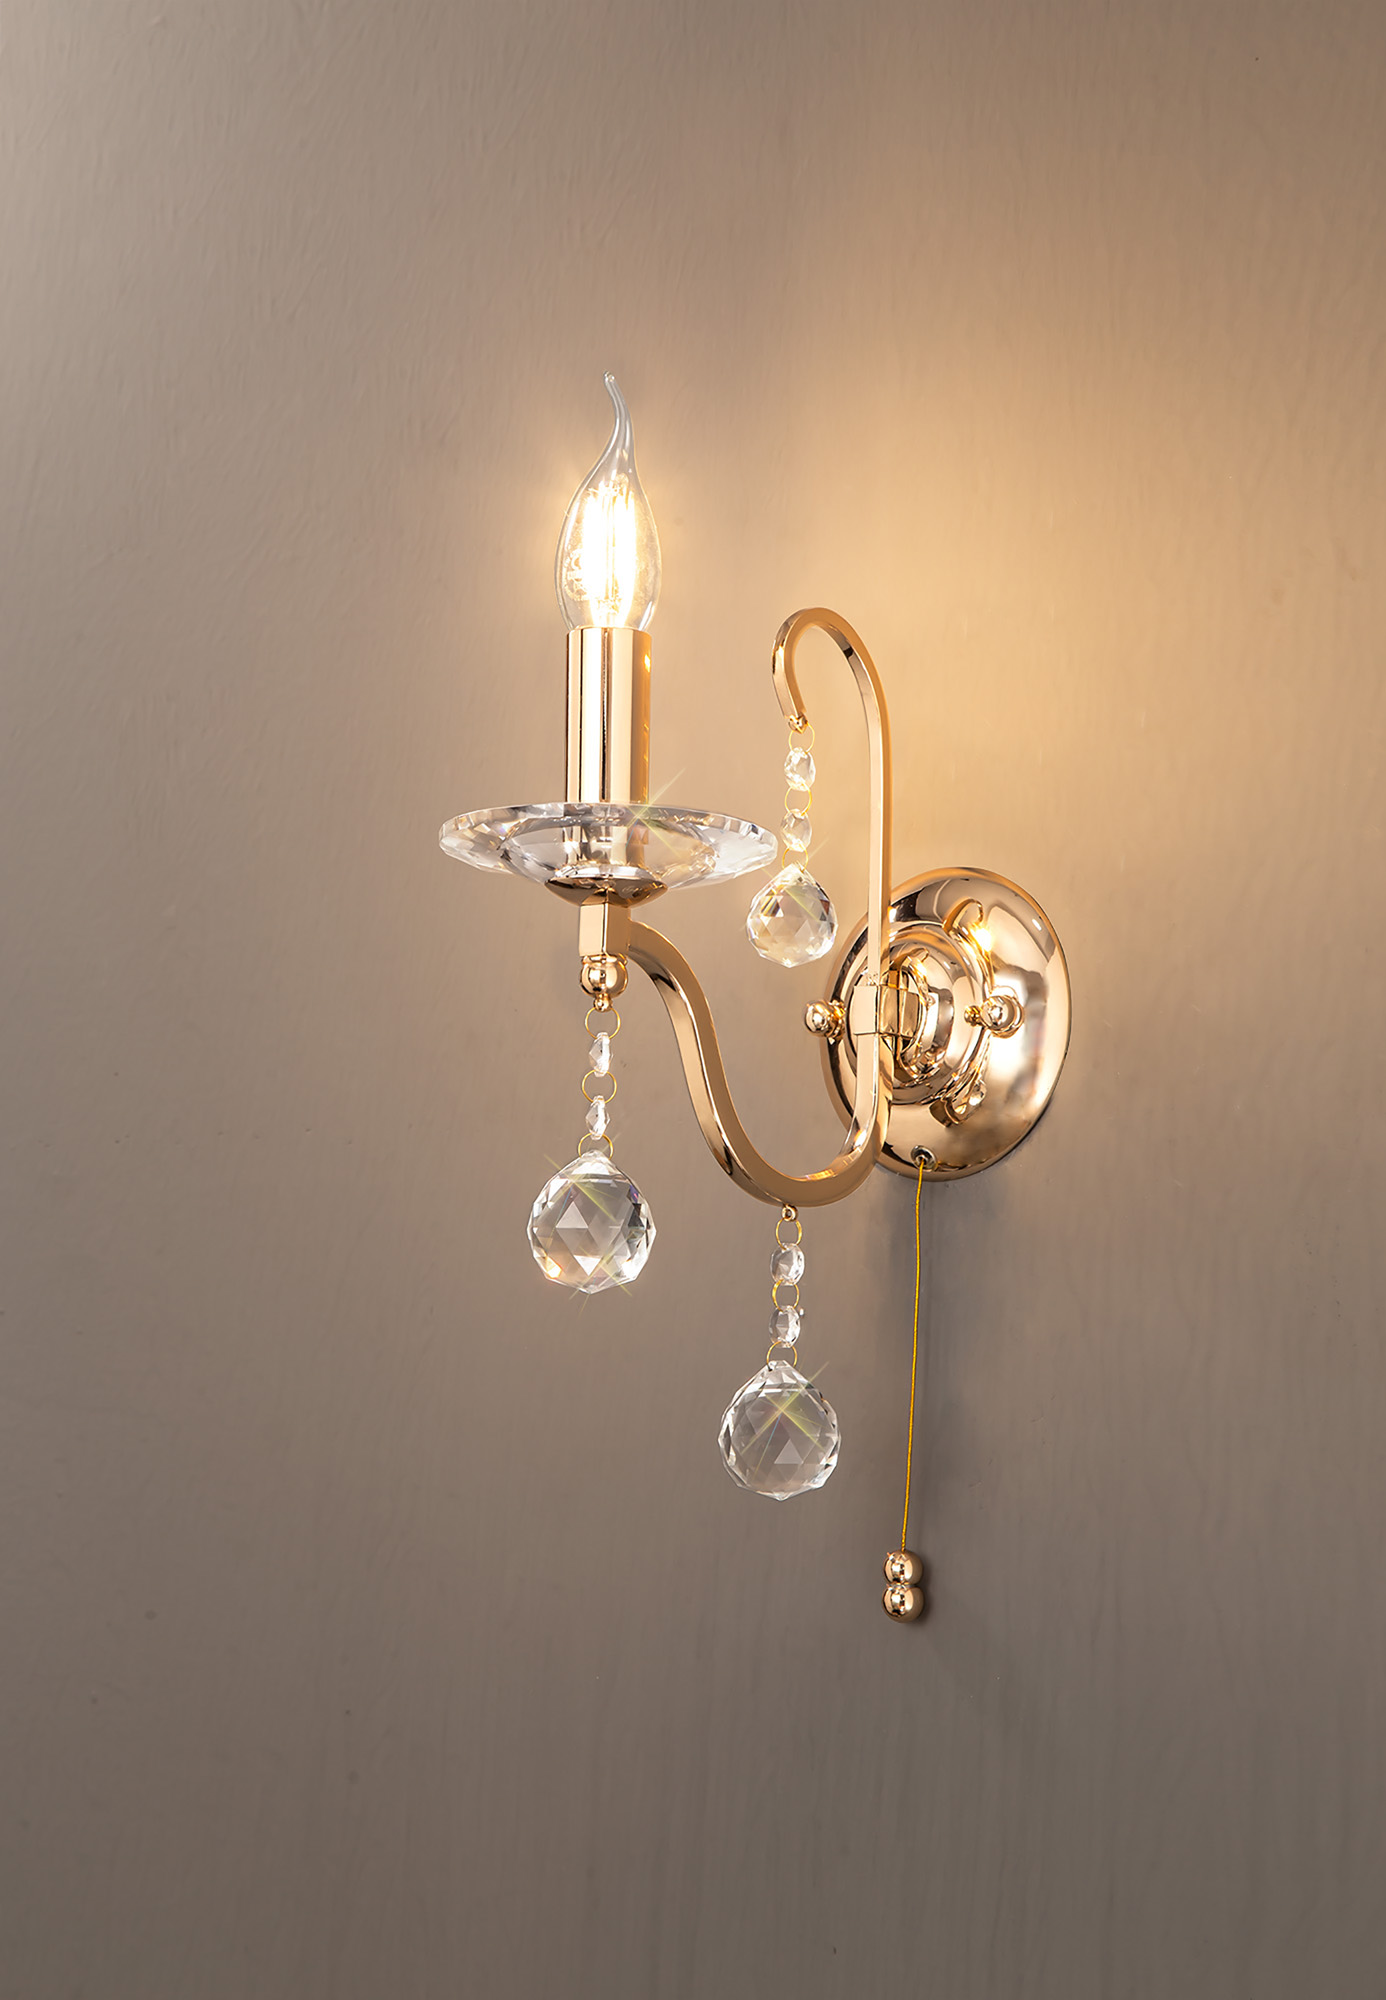 IL30211  Bianco Crystal Switched Wall Lamp 1 Light French Gold